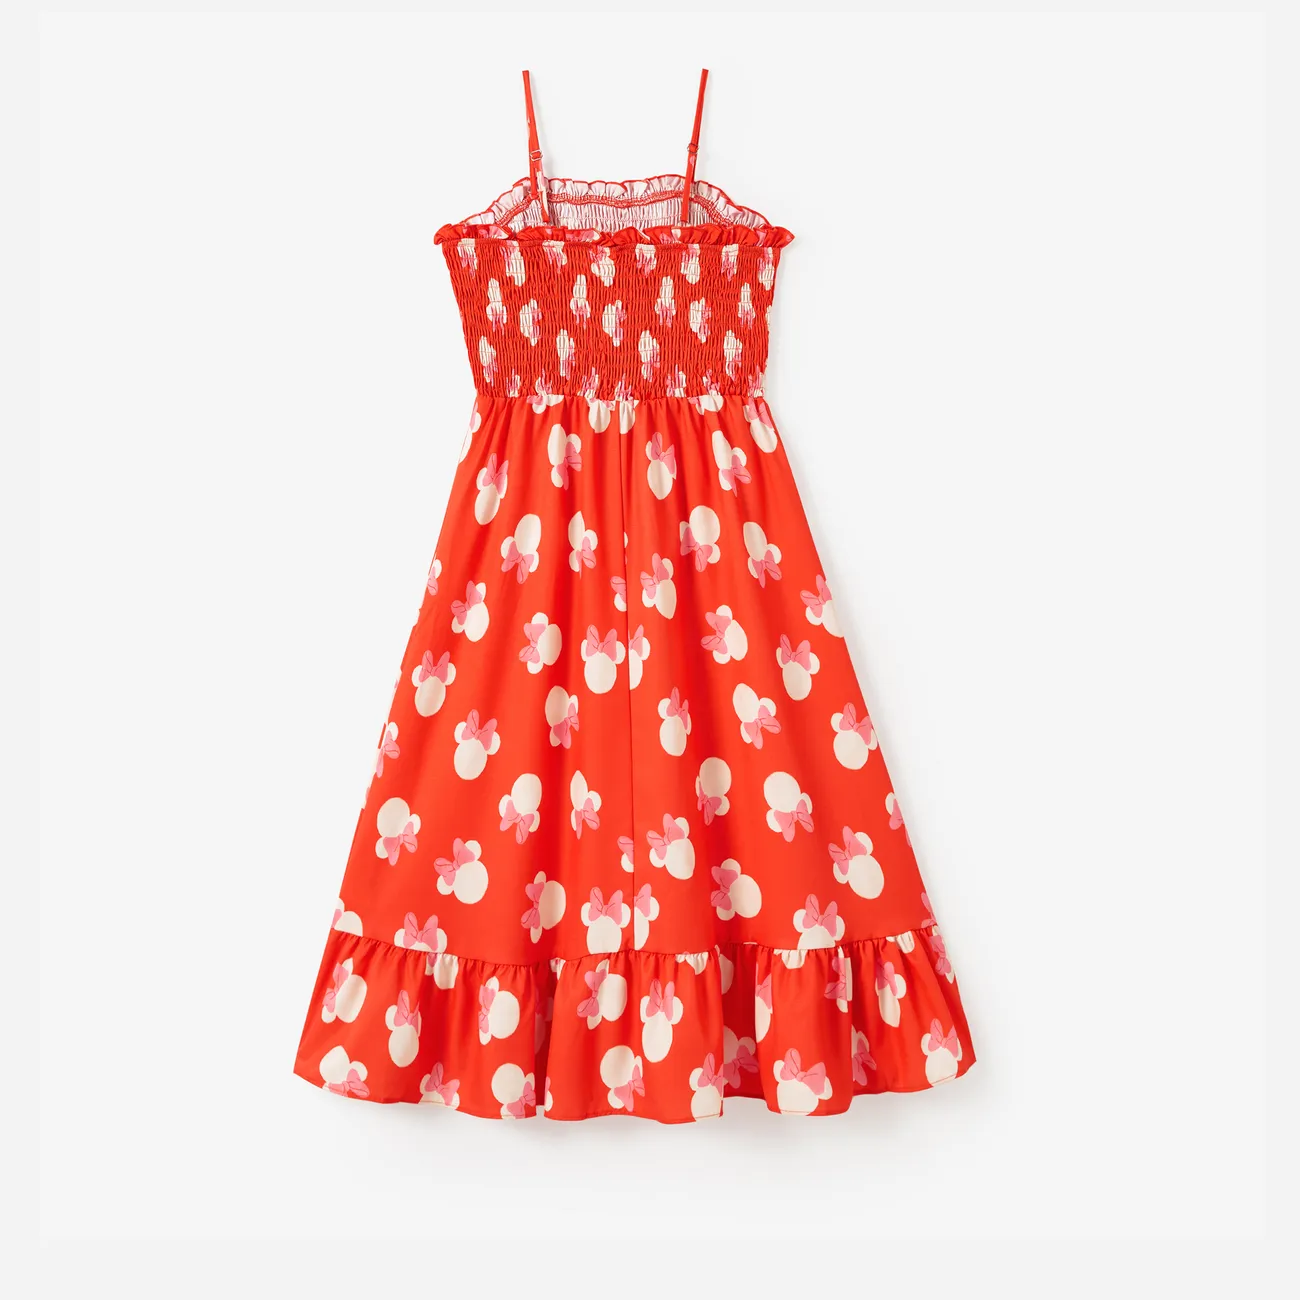 Disney Mickey and Friends Mommy and Me Minnie All-over Print Sleeveless Dress/Romper orangered big image 1